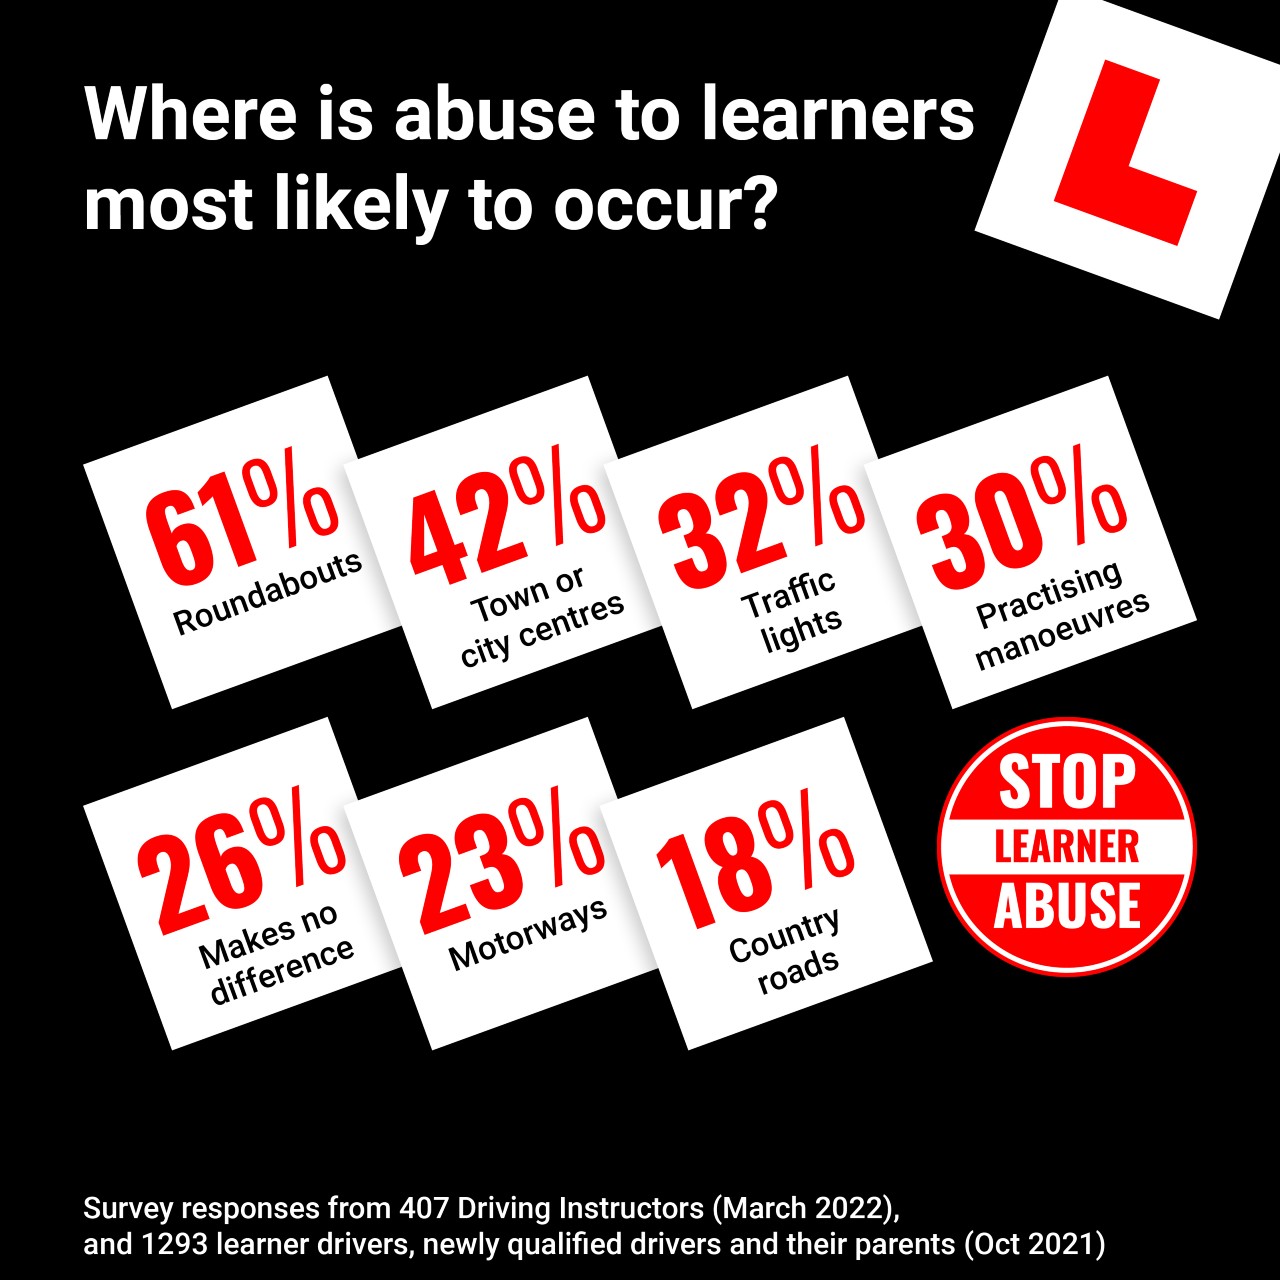 Where does learner abuse occur